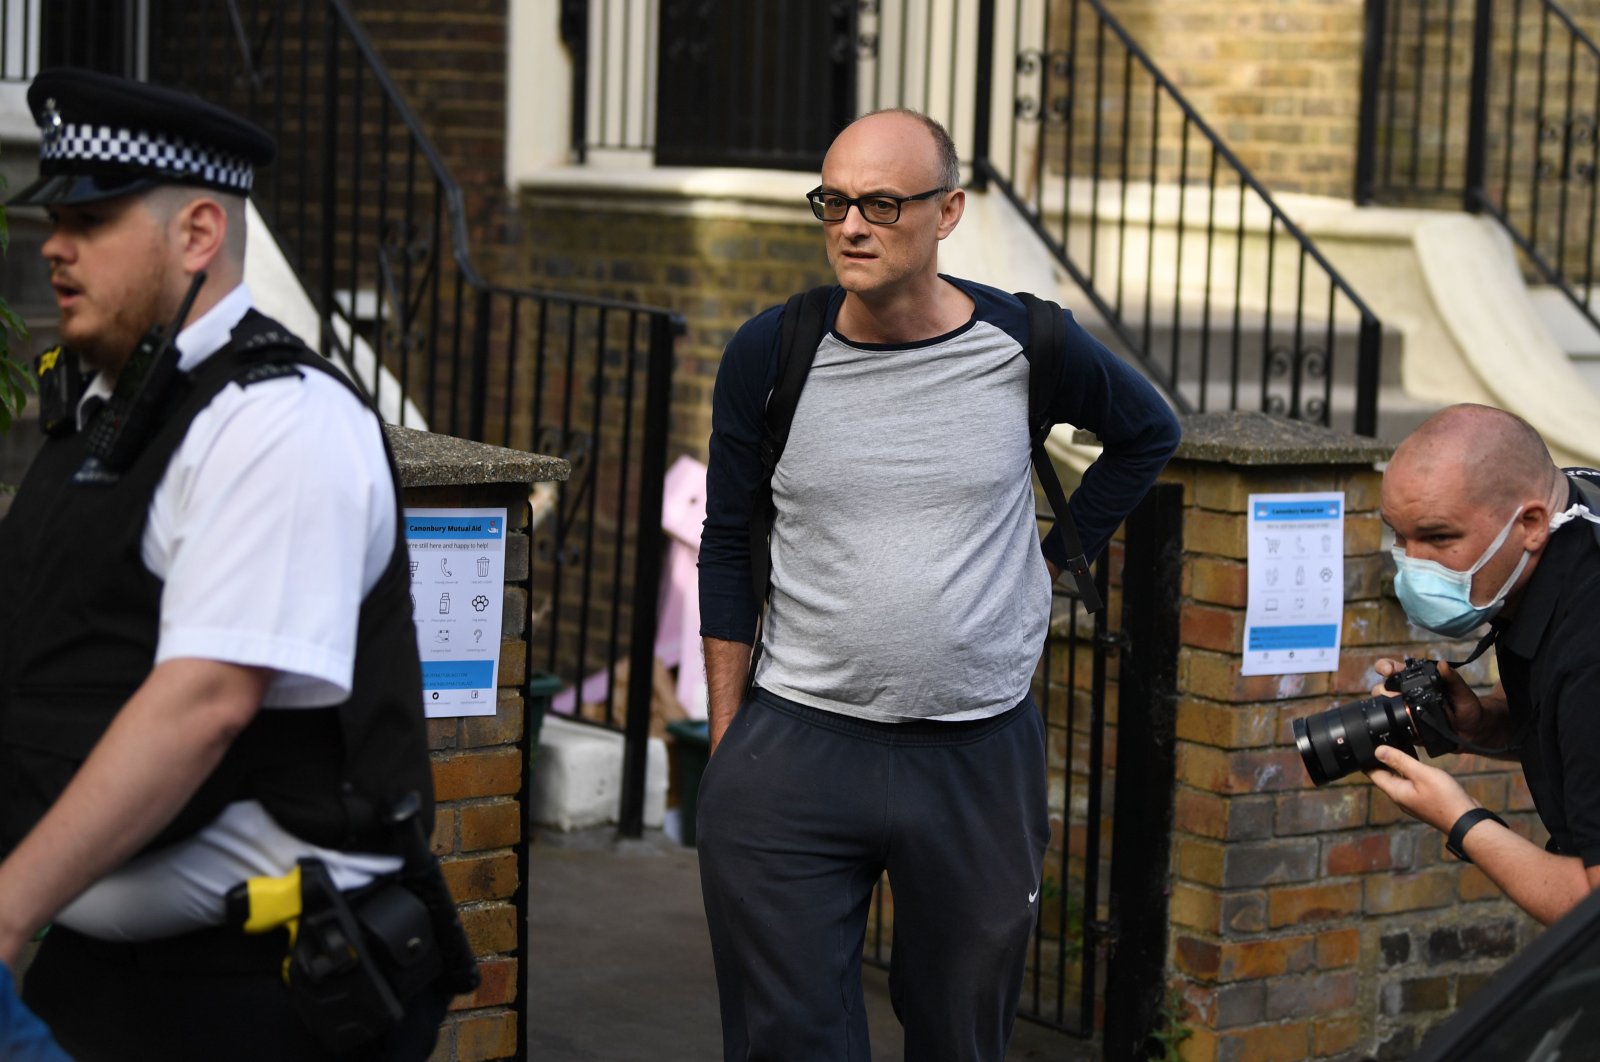 Number 10 special adviser Dominic Cummings leaves his residence, London, England, May 26, 2020. (AFP Photo)